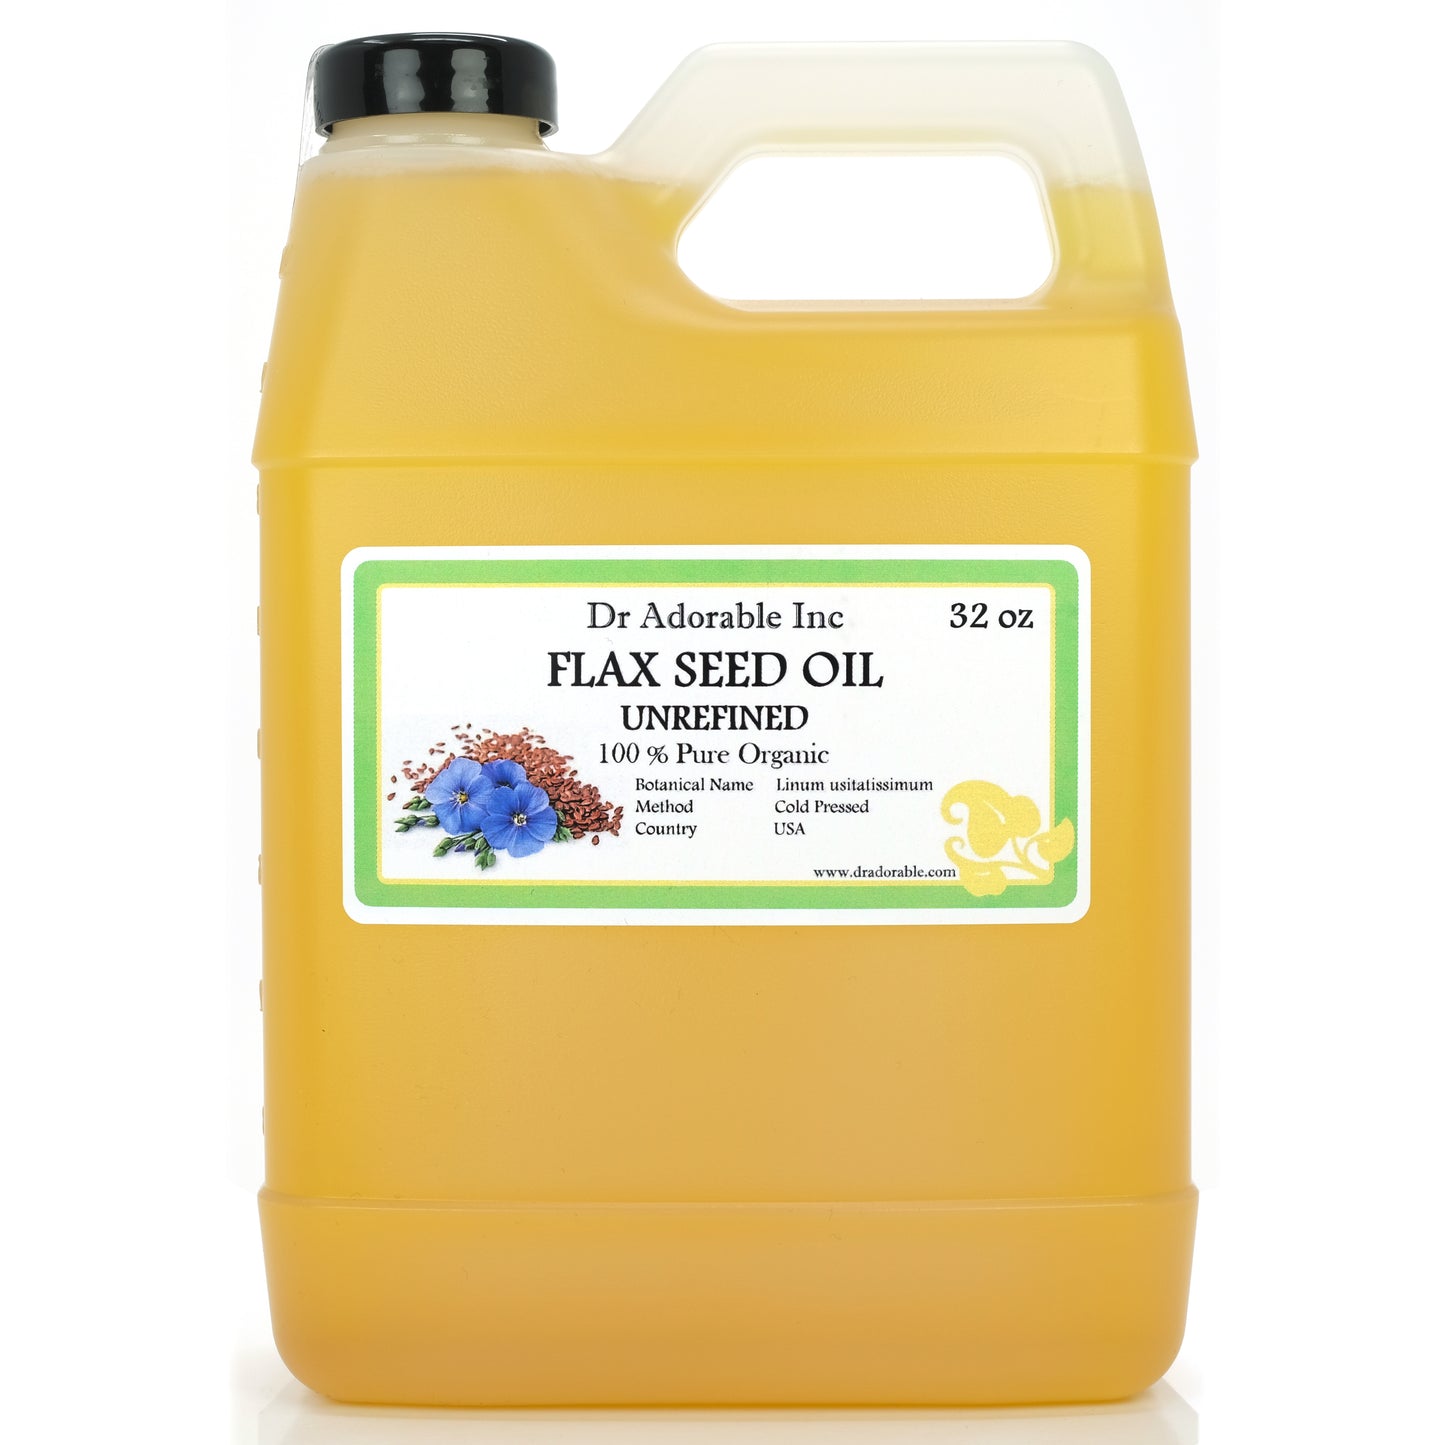 Flax Seed Oil - Unrefined 100% Pure Natural Organic Cold Pressed